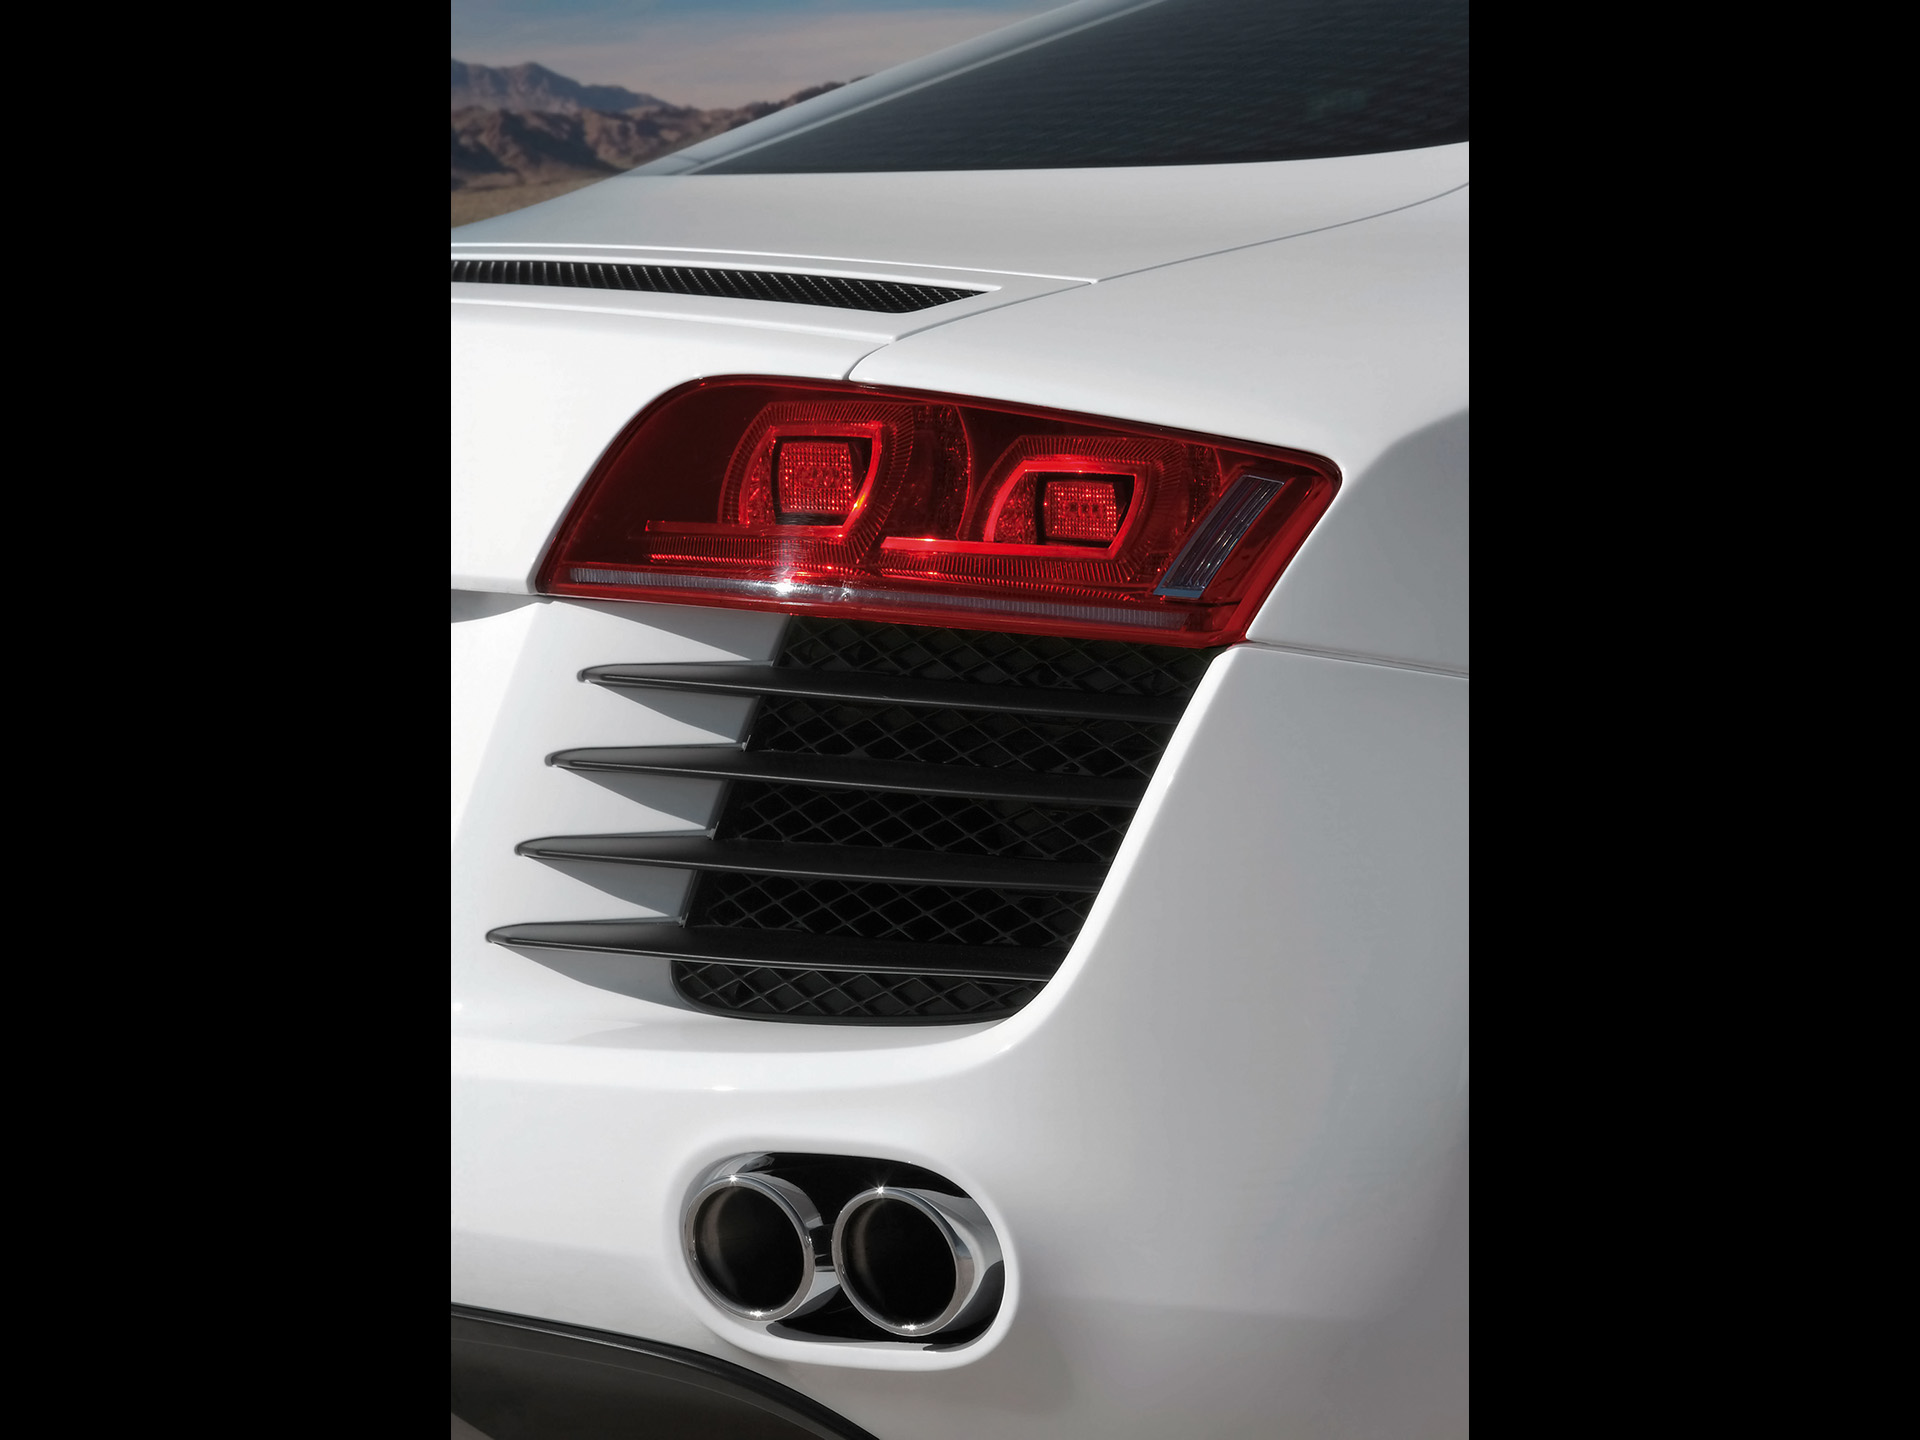 2007-Audi-R8-Rear-Light-And-Tail-Pipes-1920x1440.jpg